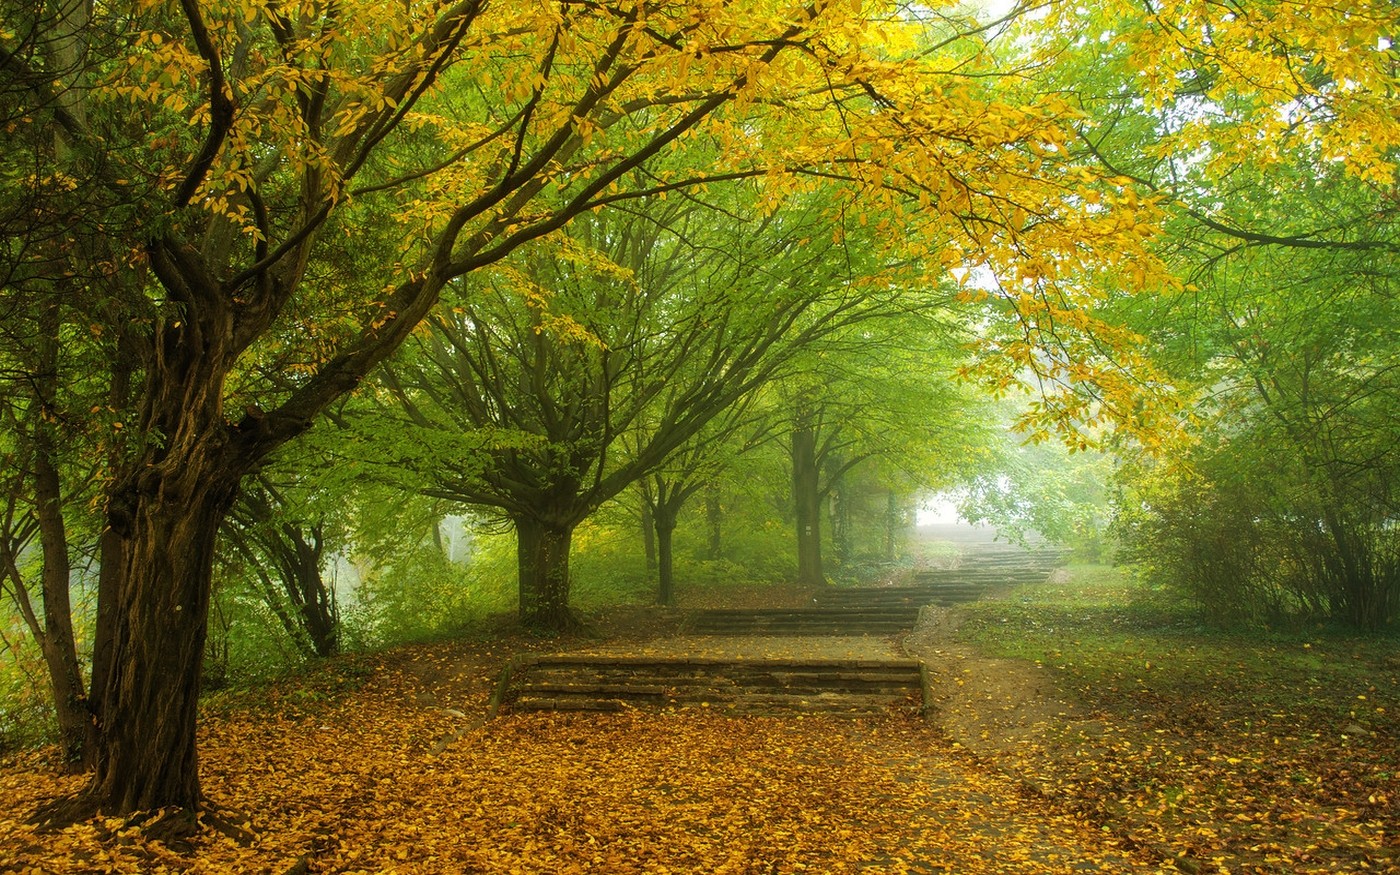 General 1400x875 nature mist morning trees fall leaves park yellow green path walkway fallen leaves plants